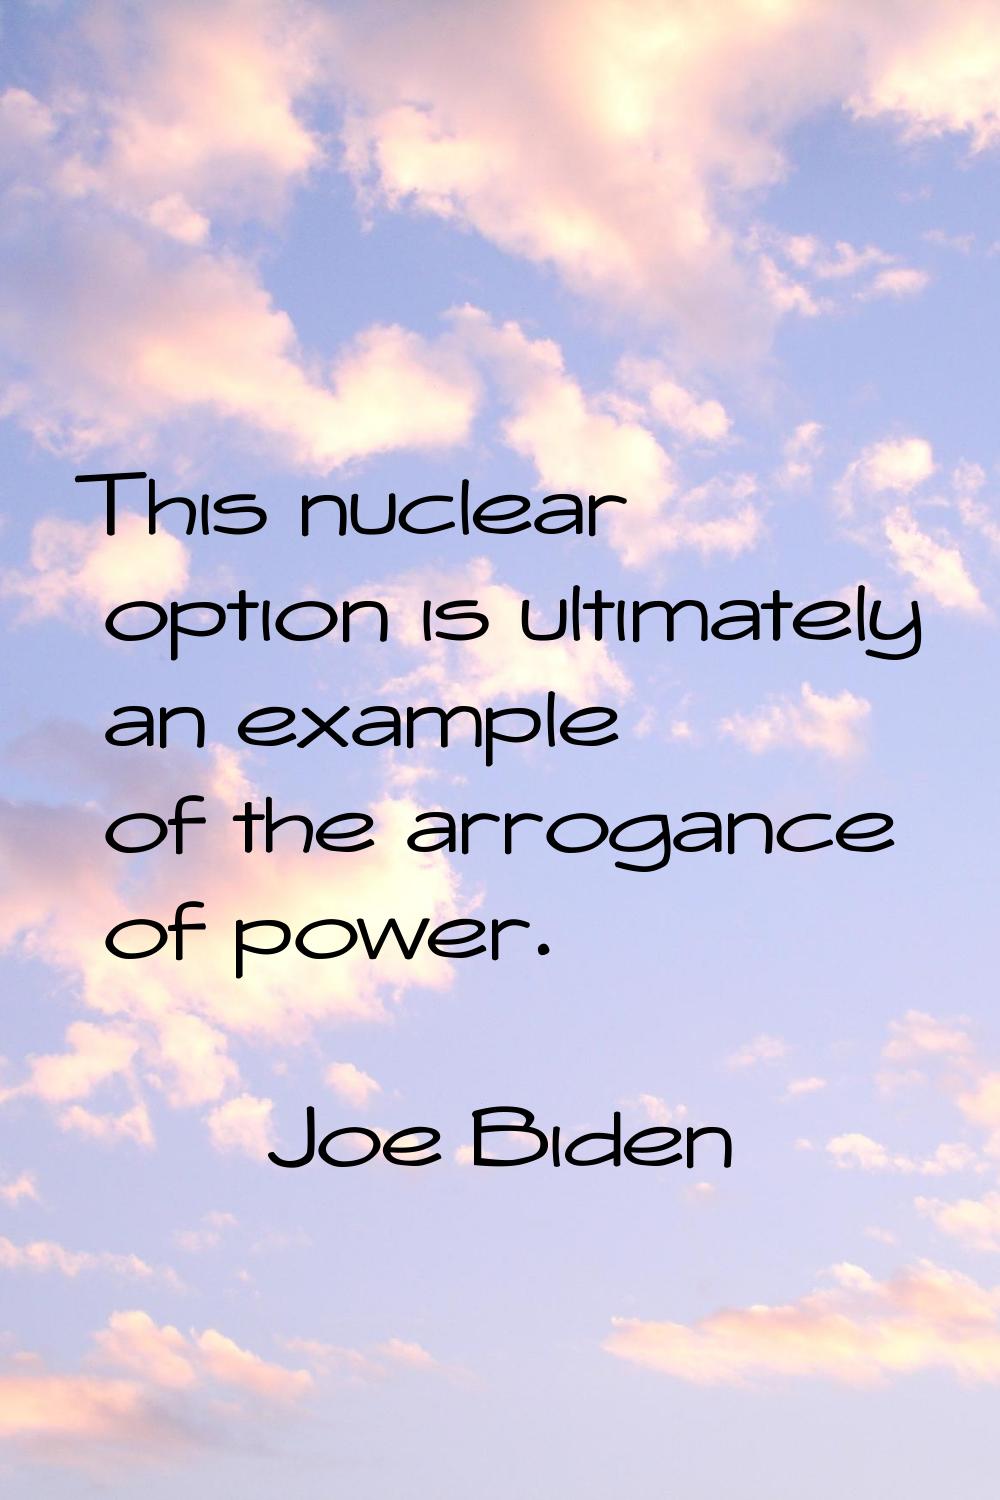 This nuclear option is ultimately an example of the arrogance of power.